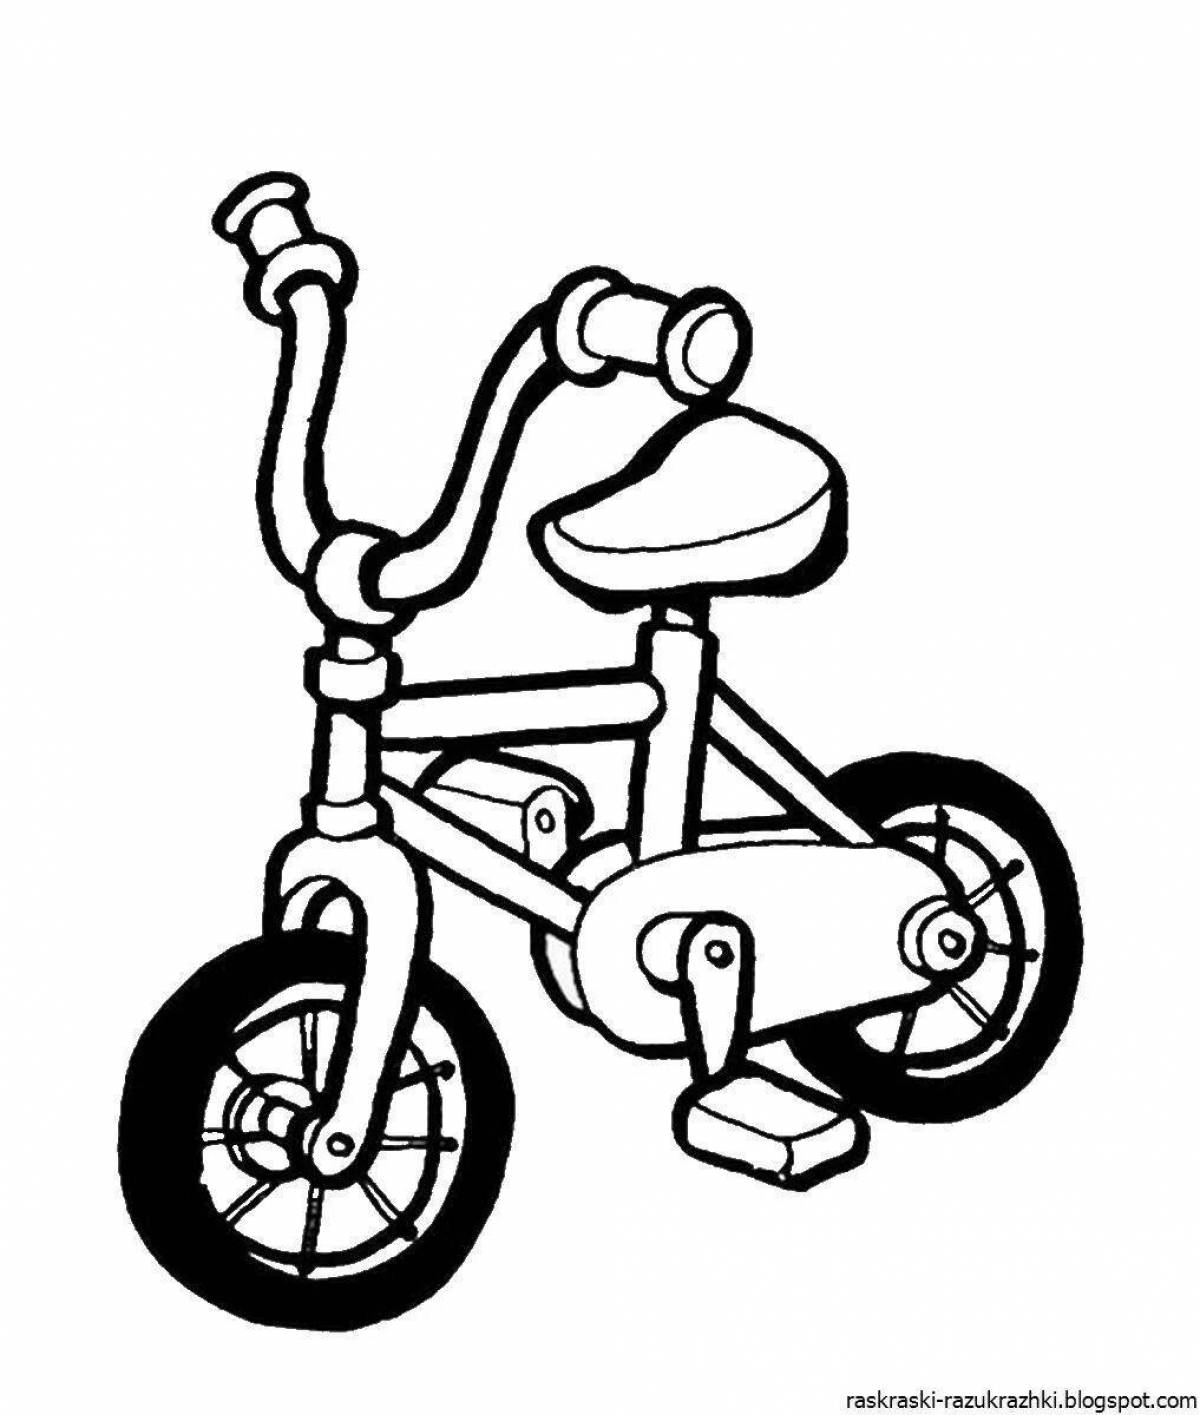 Great scooter coloring book for kids